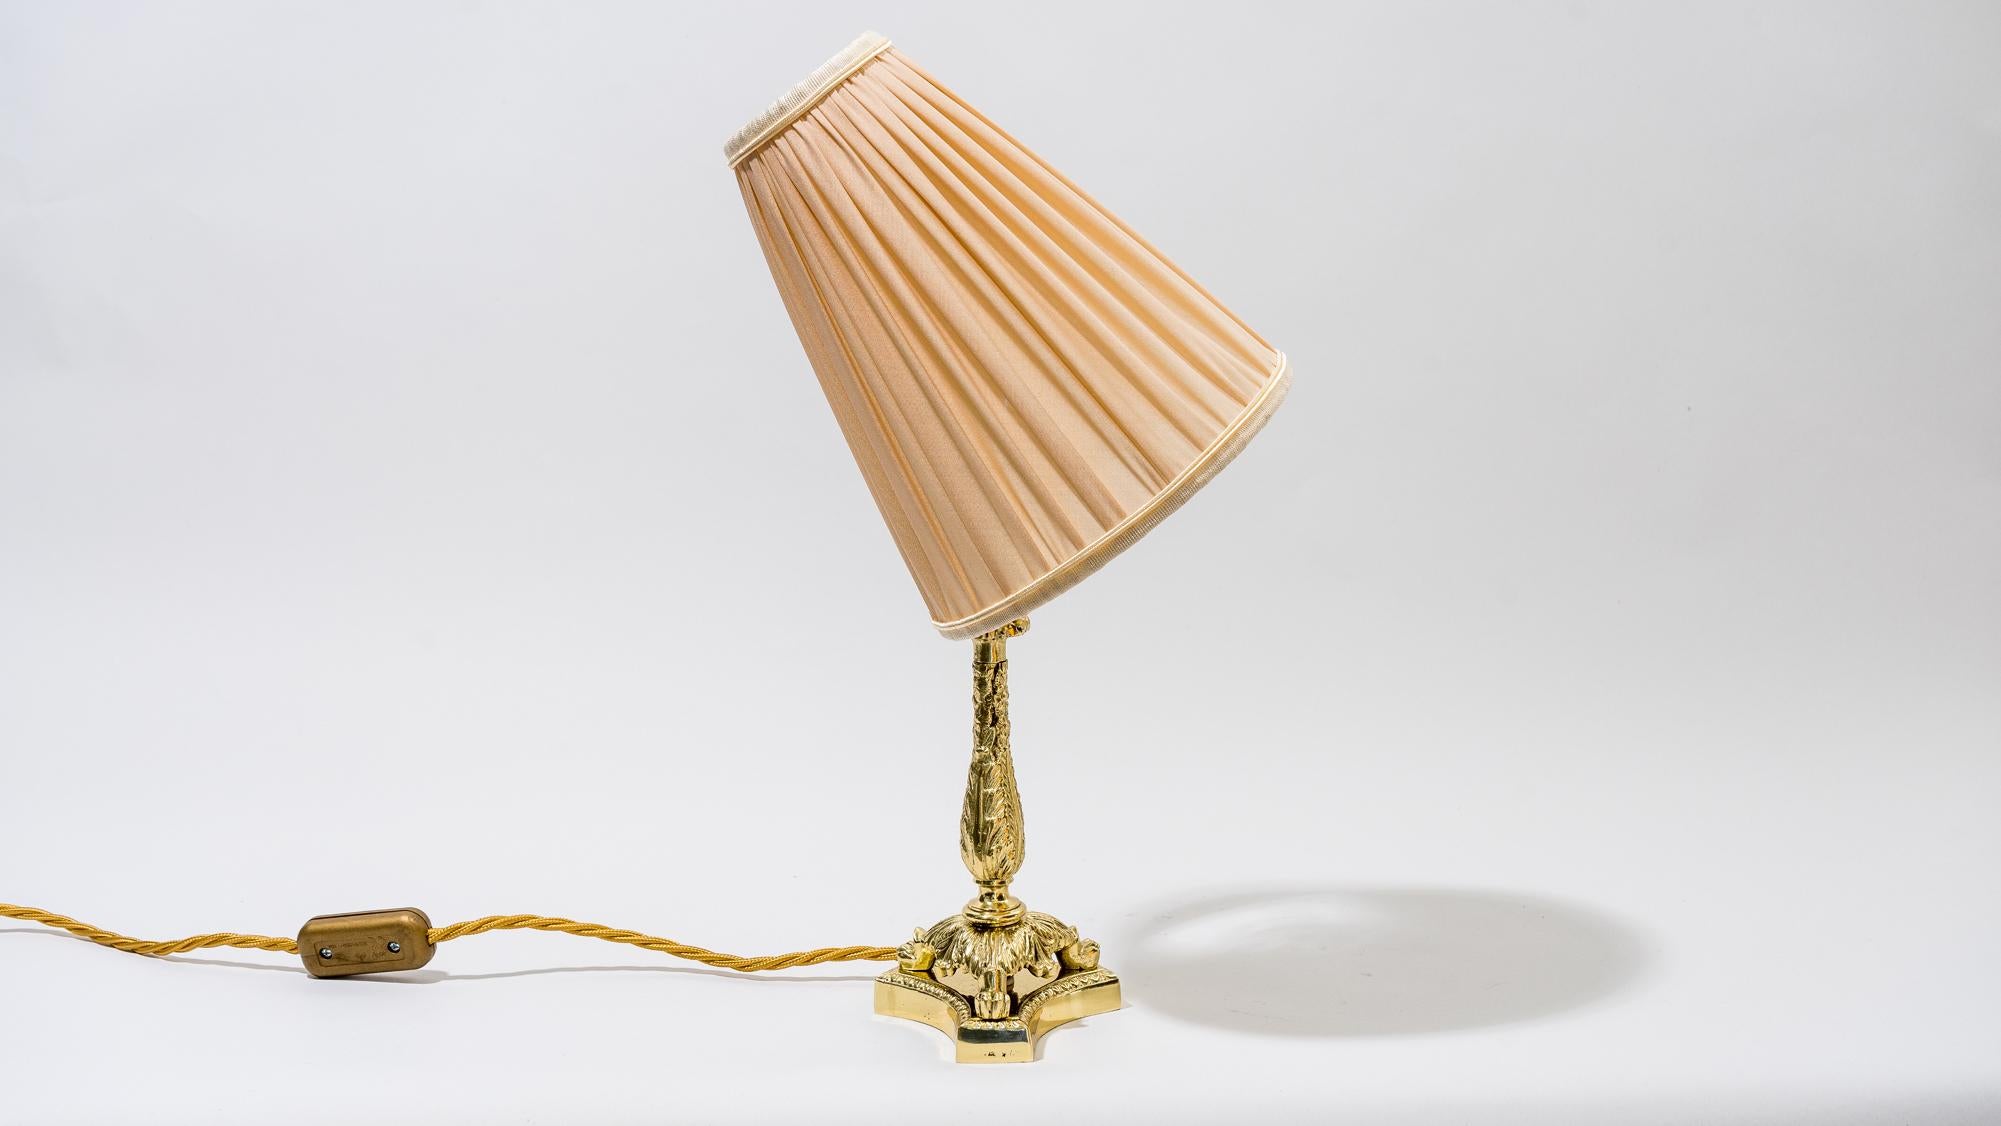 Historistic table lamp, Vienna, circa 1890s
Brass polished and stove enameled
The shade is replaced (new).